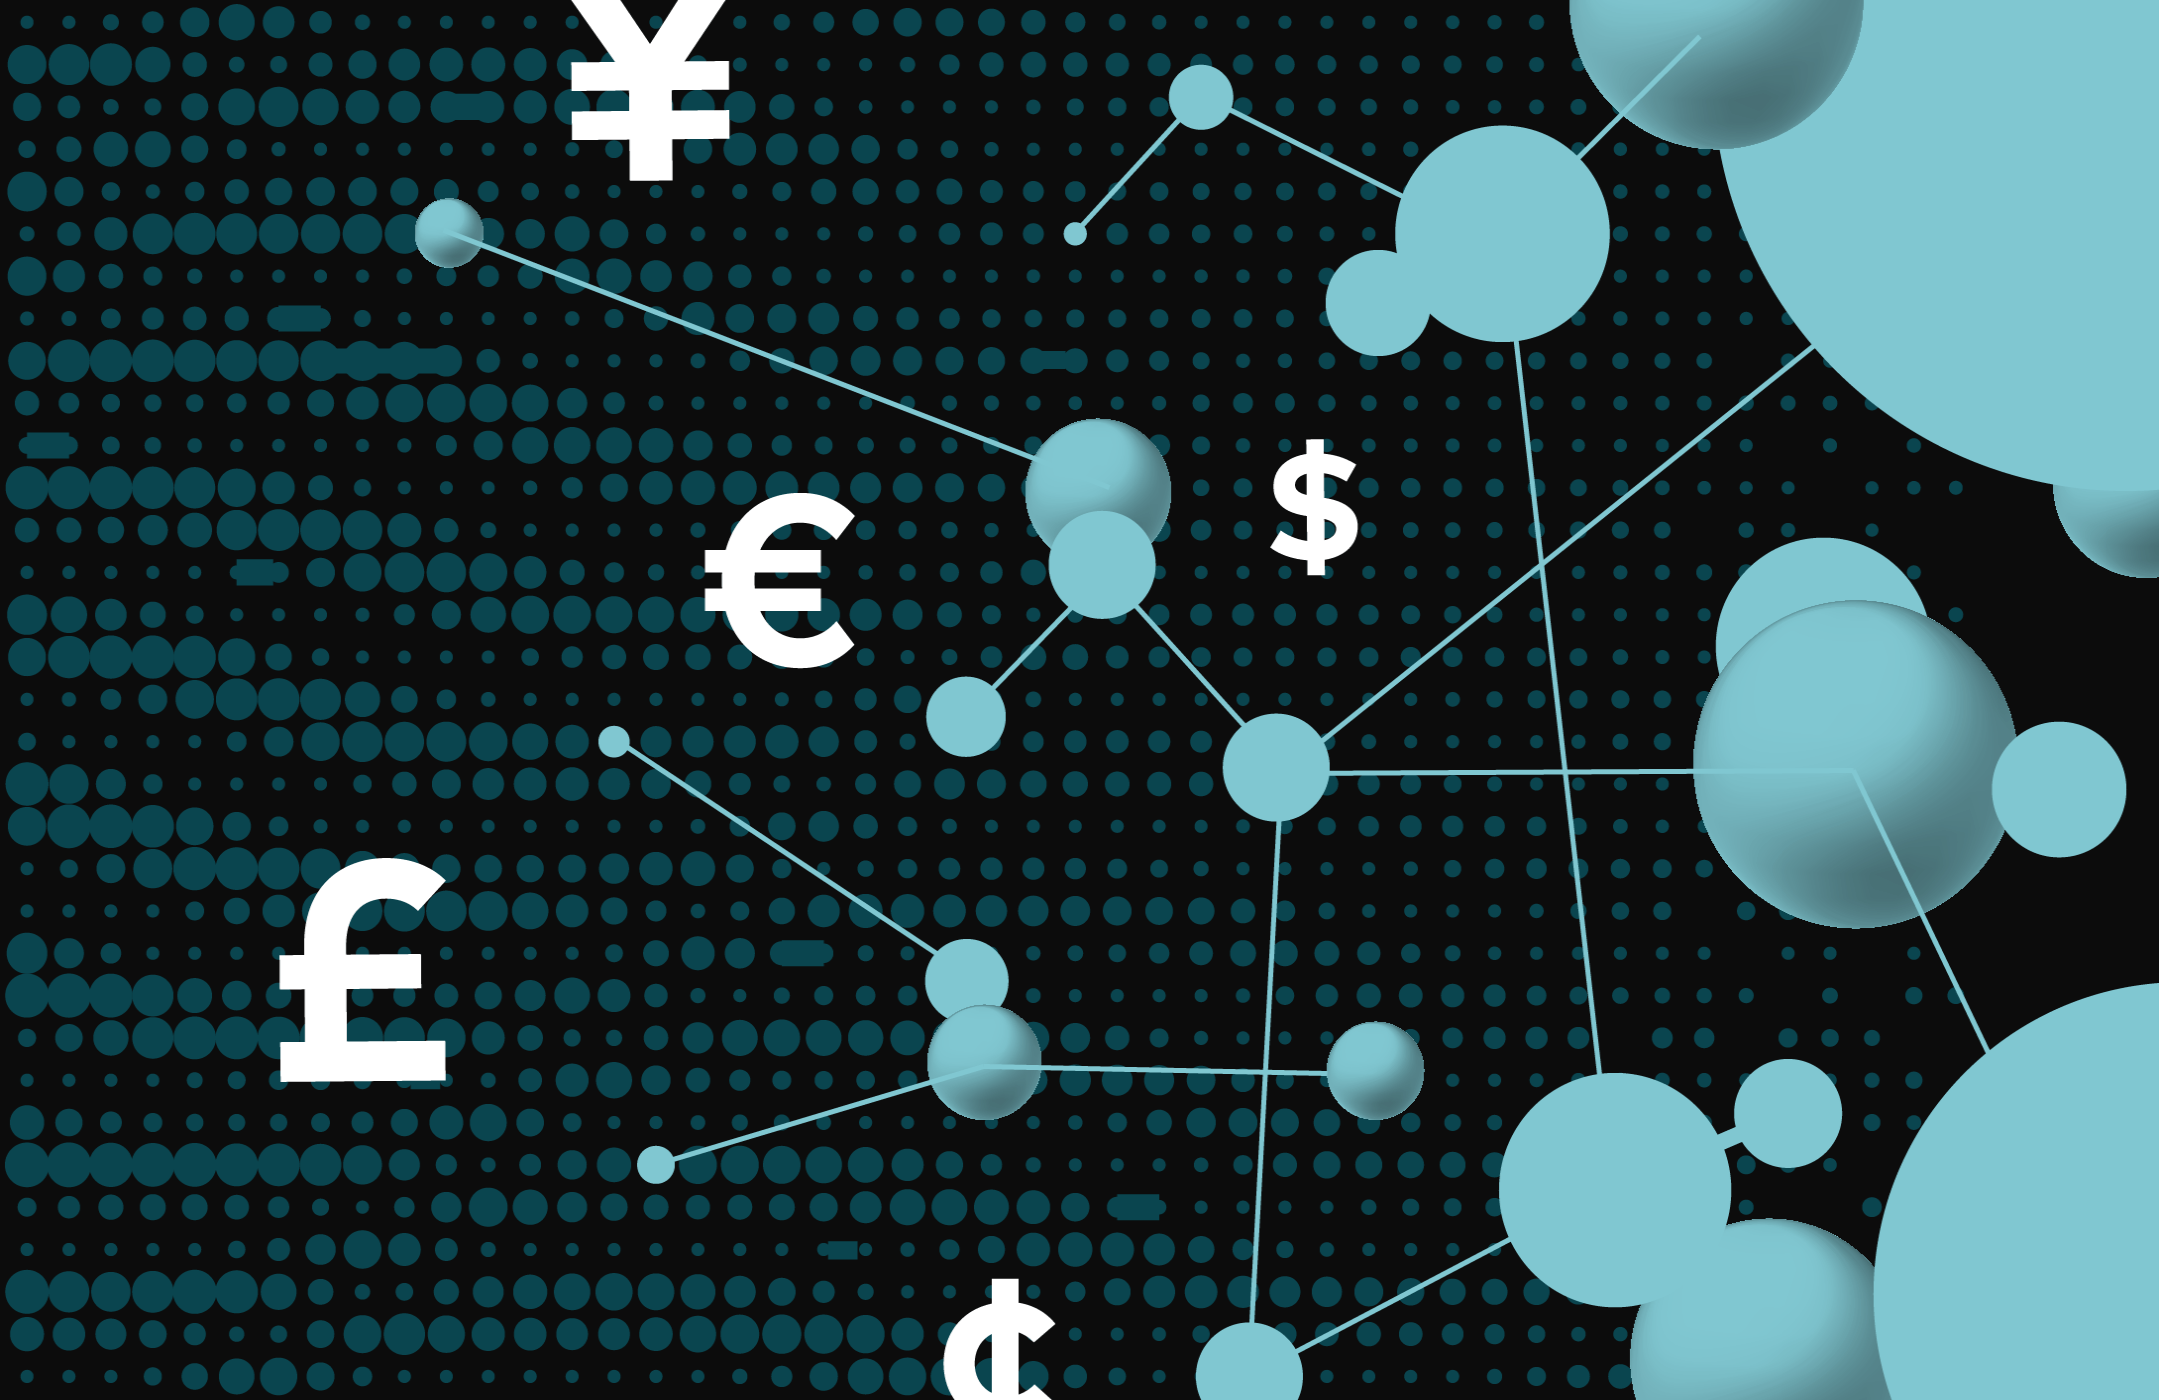 Teal spheres connected with nodes in a teal background with currency icons